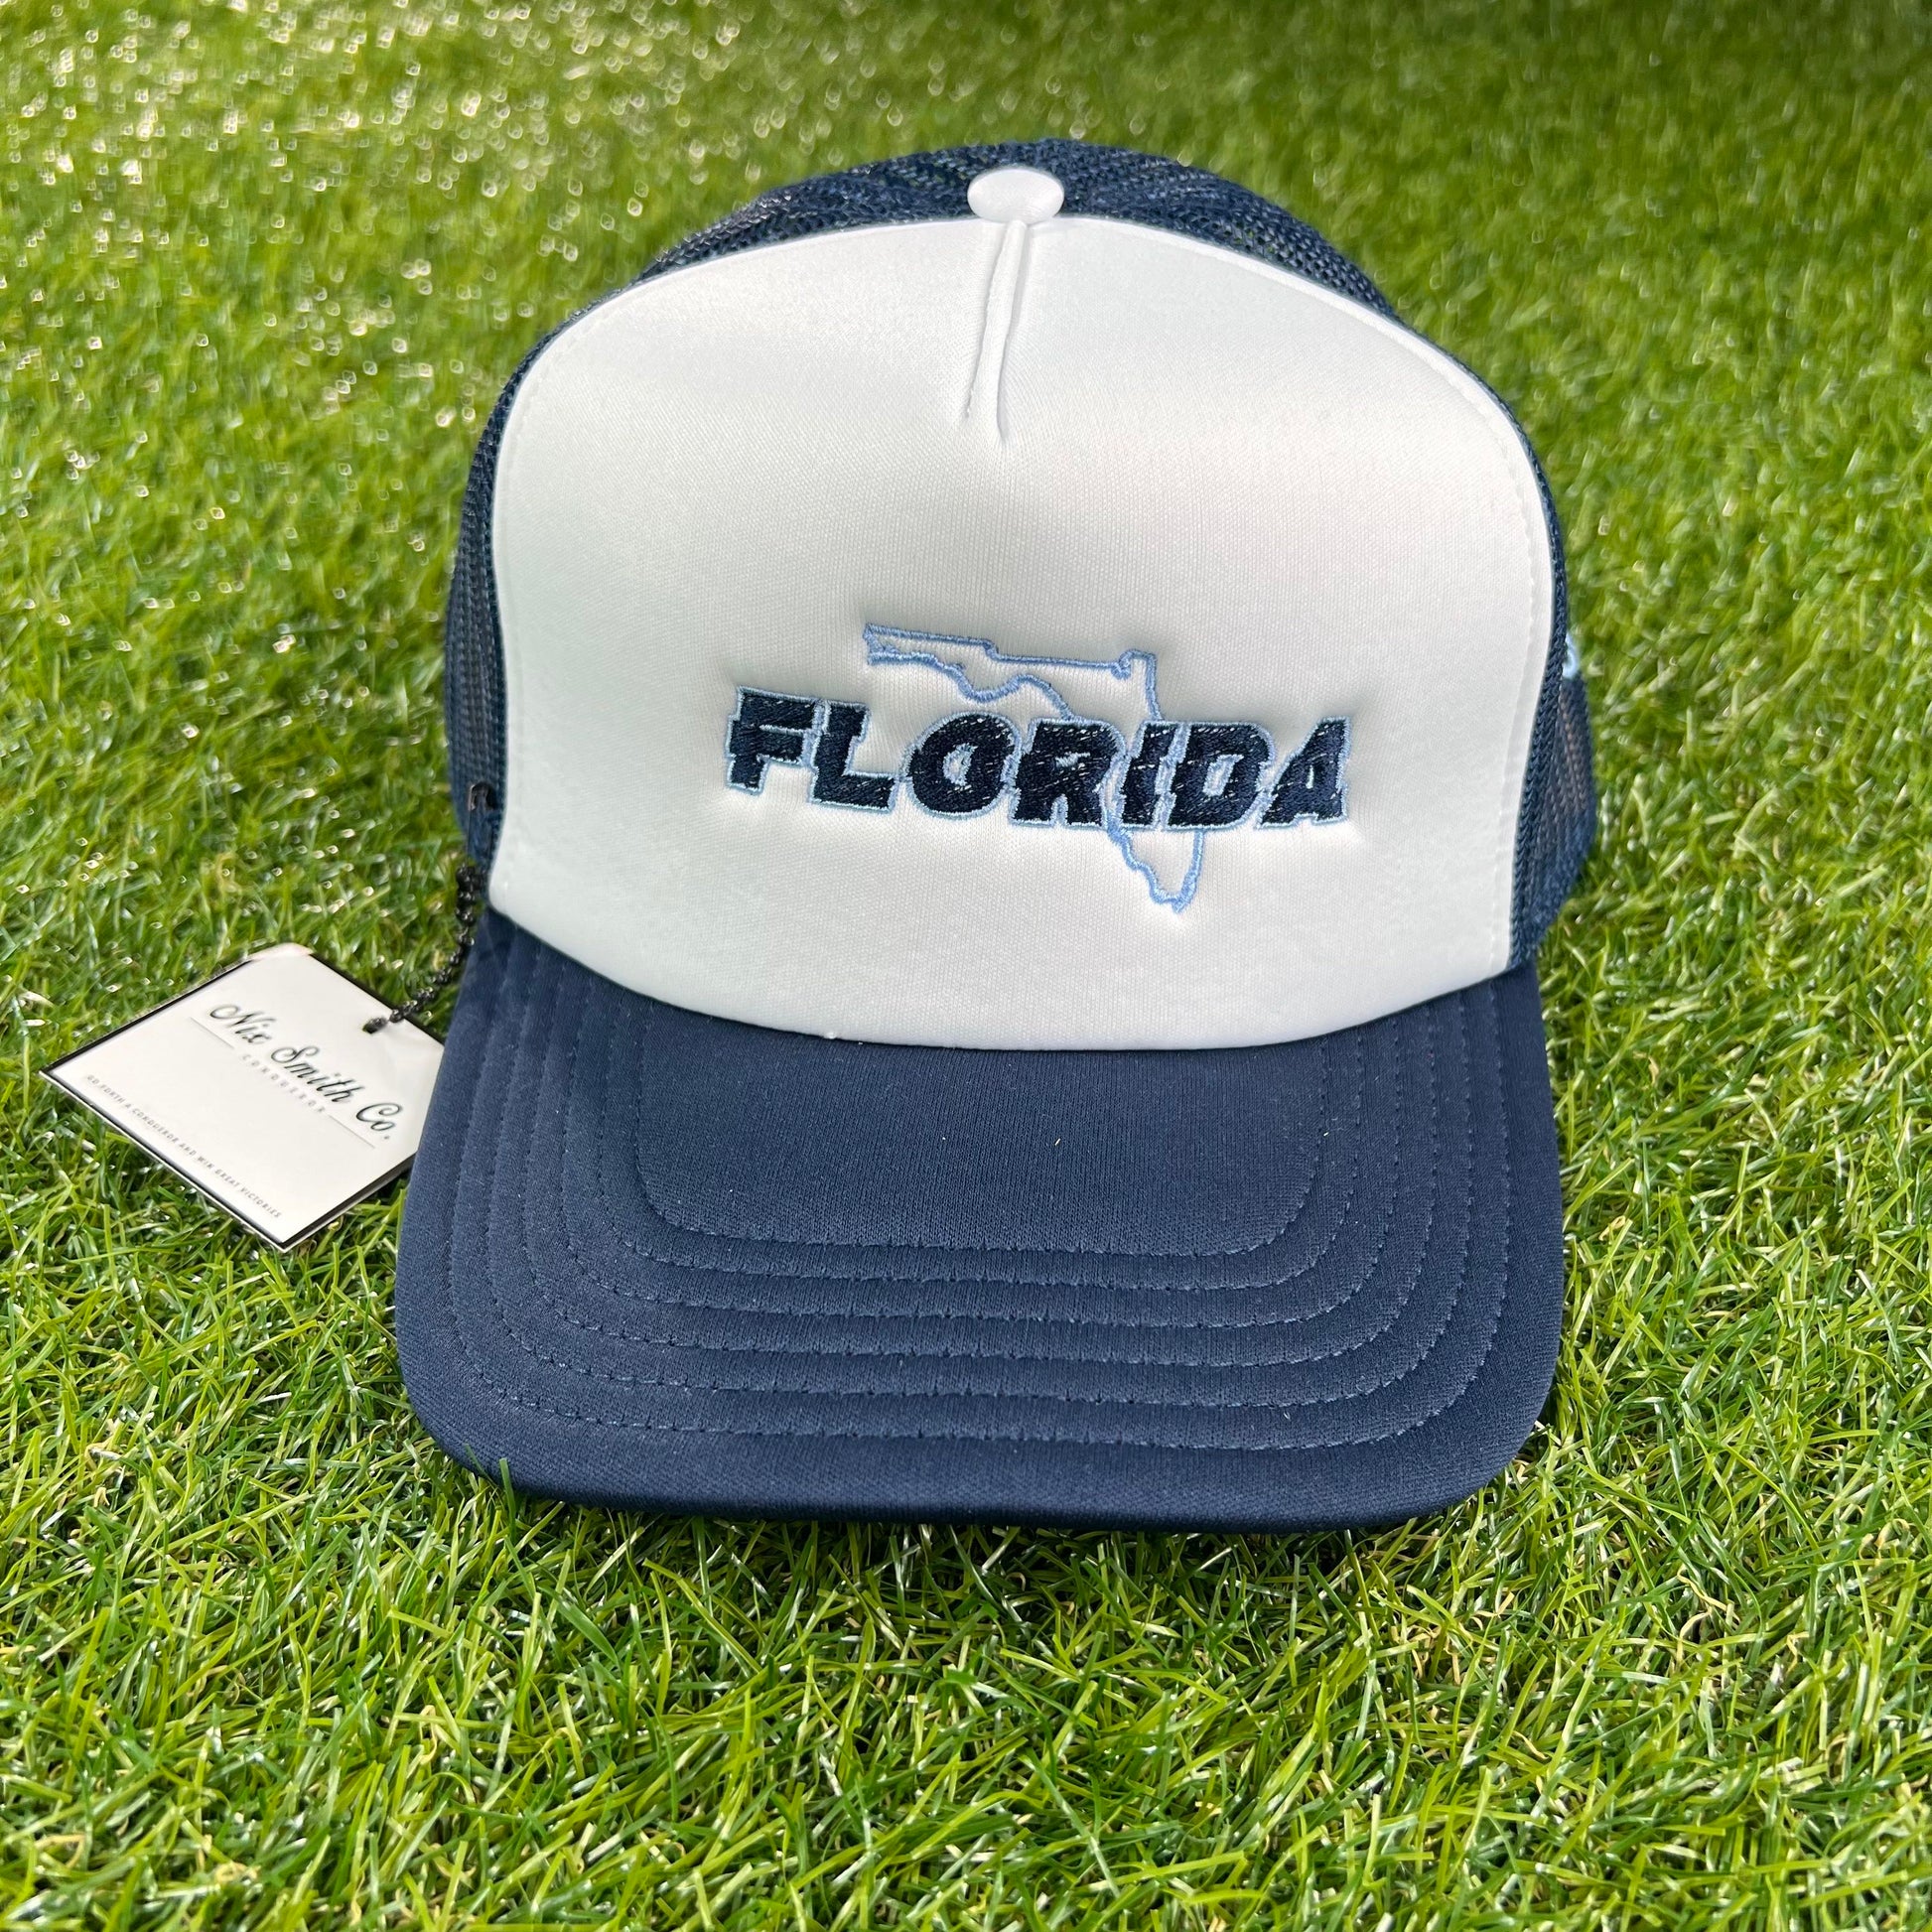 Florida Hats, Hats, Fitted Hats, Trucker, Style, Snapback, Men, Boys, Teens, Gifts, Hat, Nix Smith Co, Urban, Wmns, Girls, Navy Hat, Light Blue Hat, White Hat, Florida, 